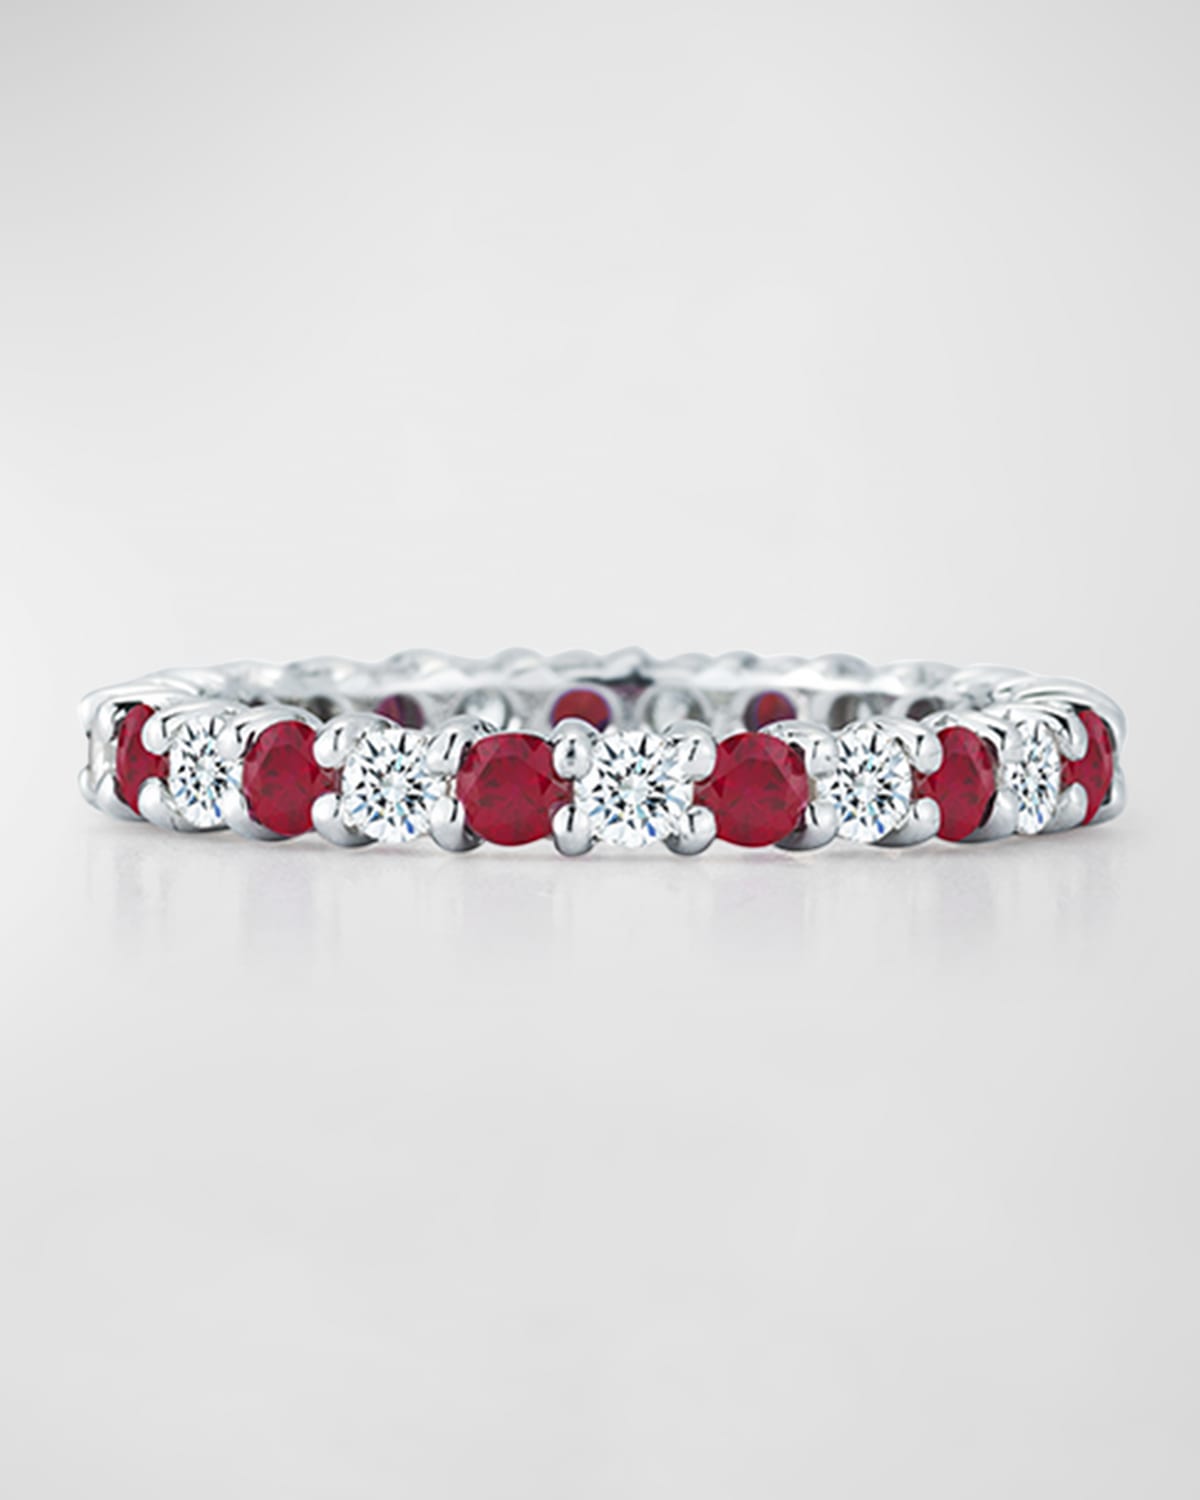 NM Diamond Collection Ruby & Diamond Eternity Band in Platinum, Size 6.5